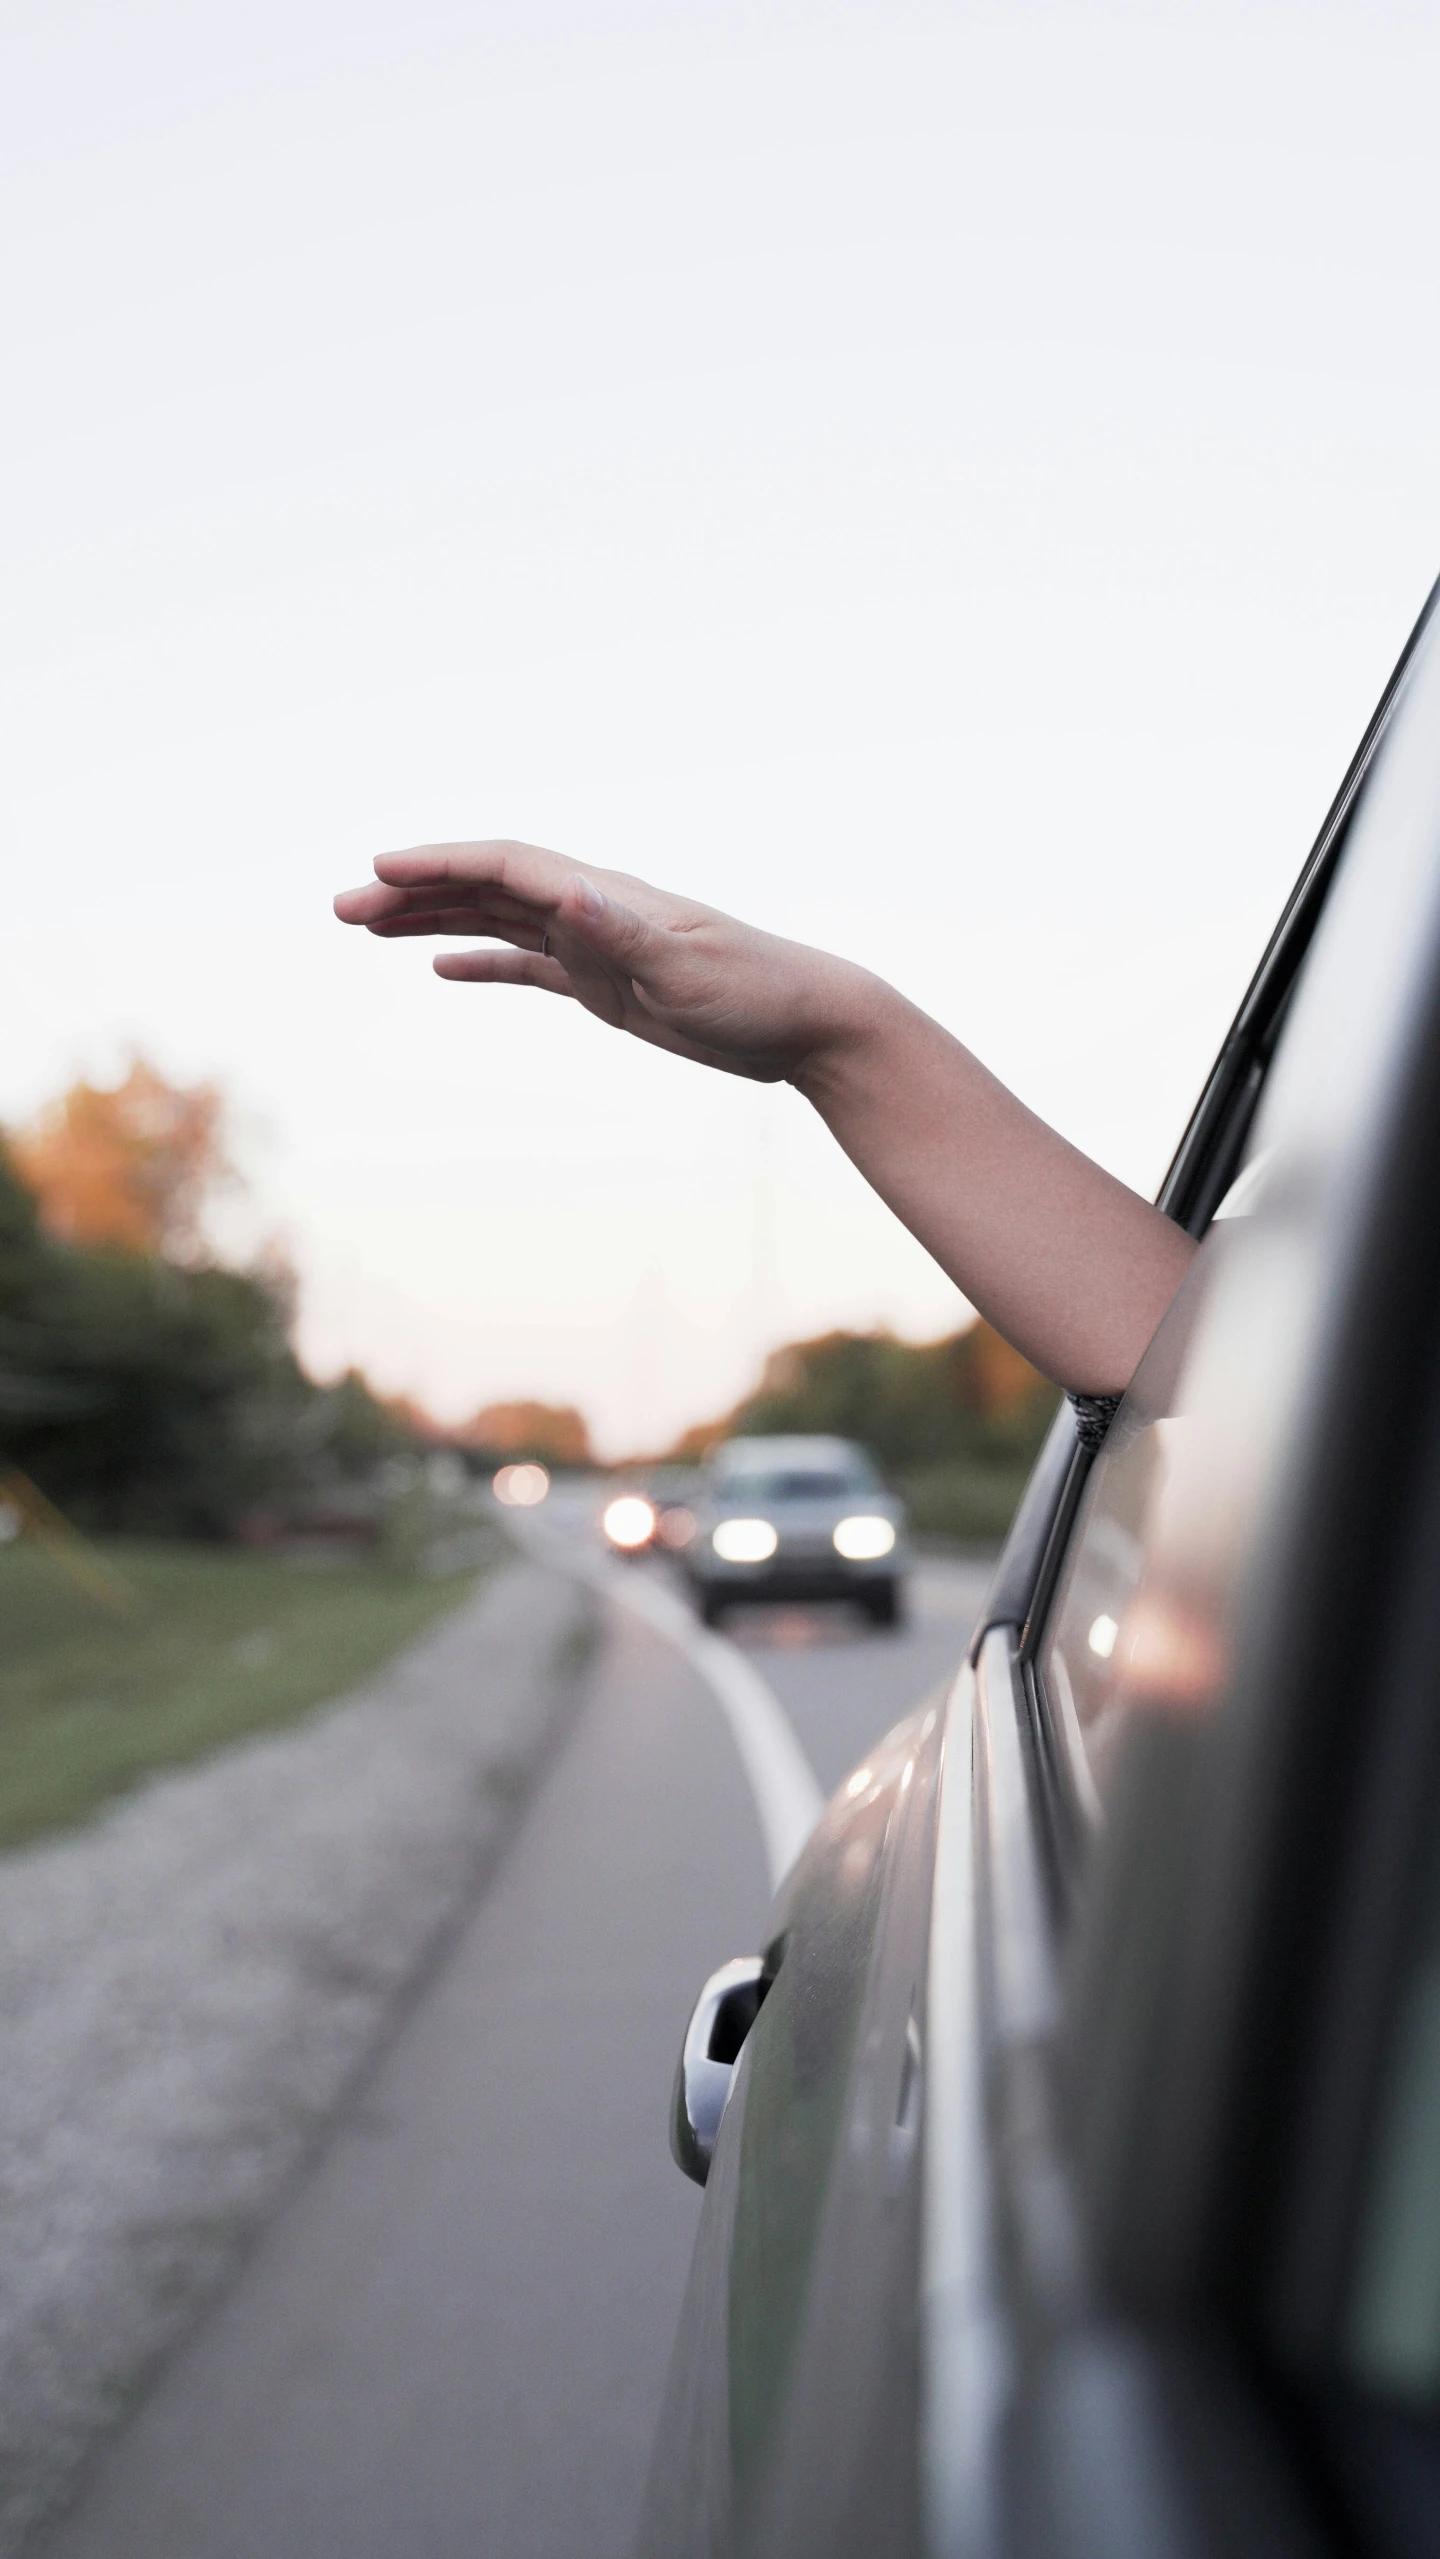 a hand sticking out the window of a car